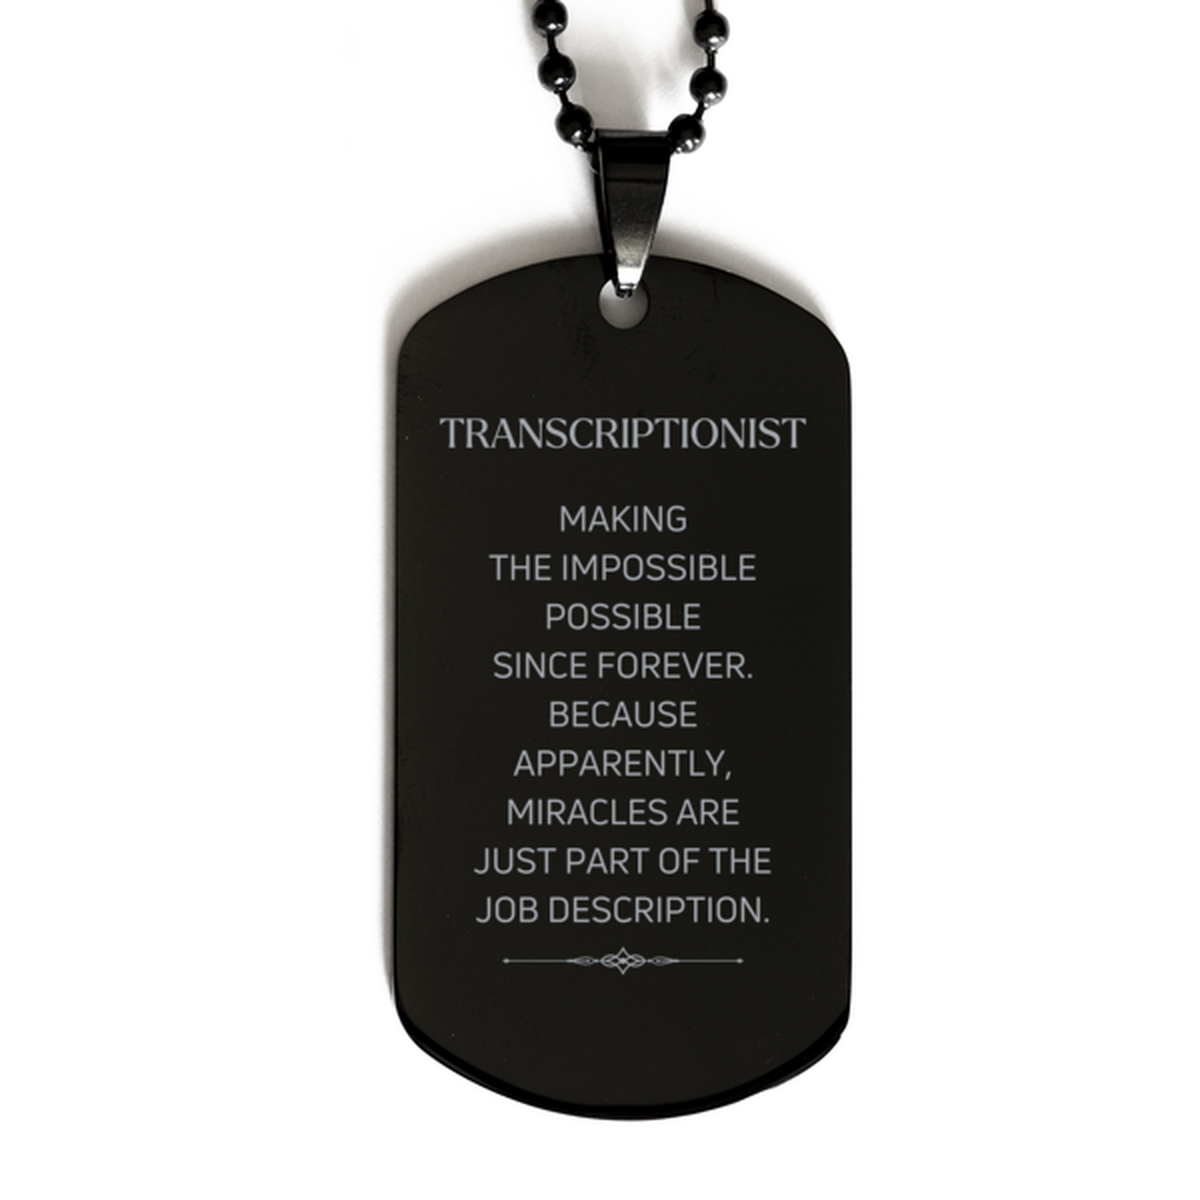 Funny Transcriptionist Gifts, Miracles are just part of the job description, Inspirational Birthday Black Dog Tag For Transcriptionist, Men, Women, Coworkers, Friends, Boss